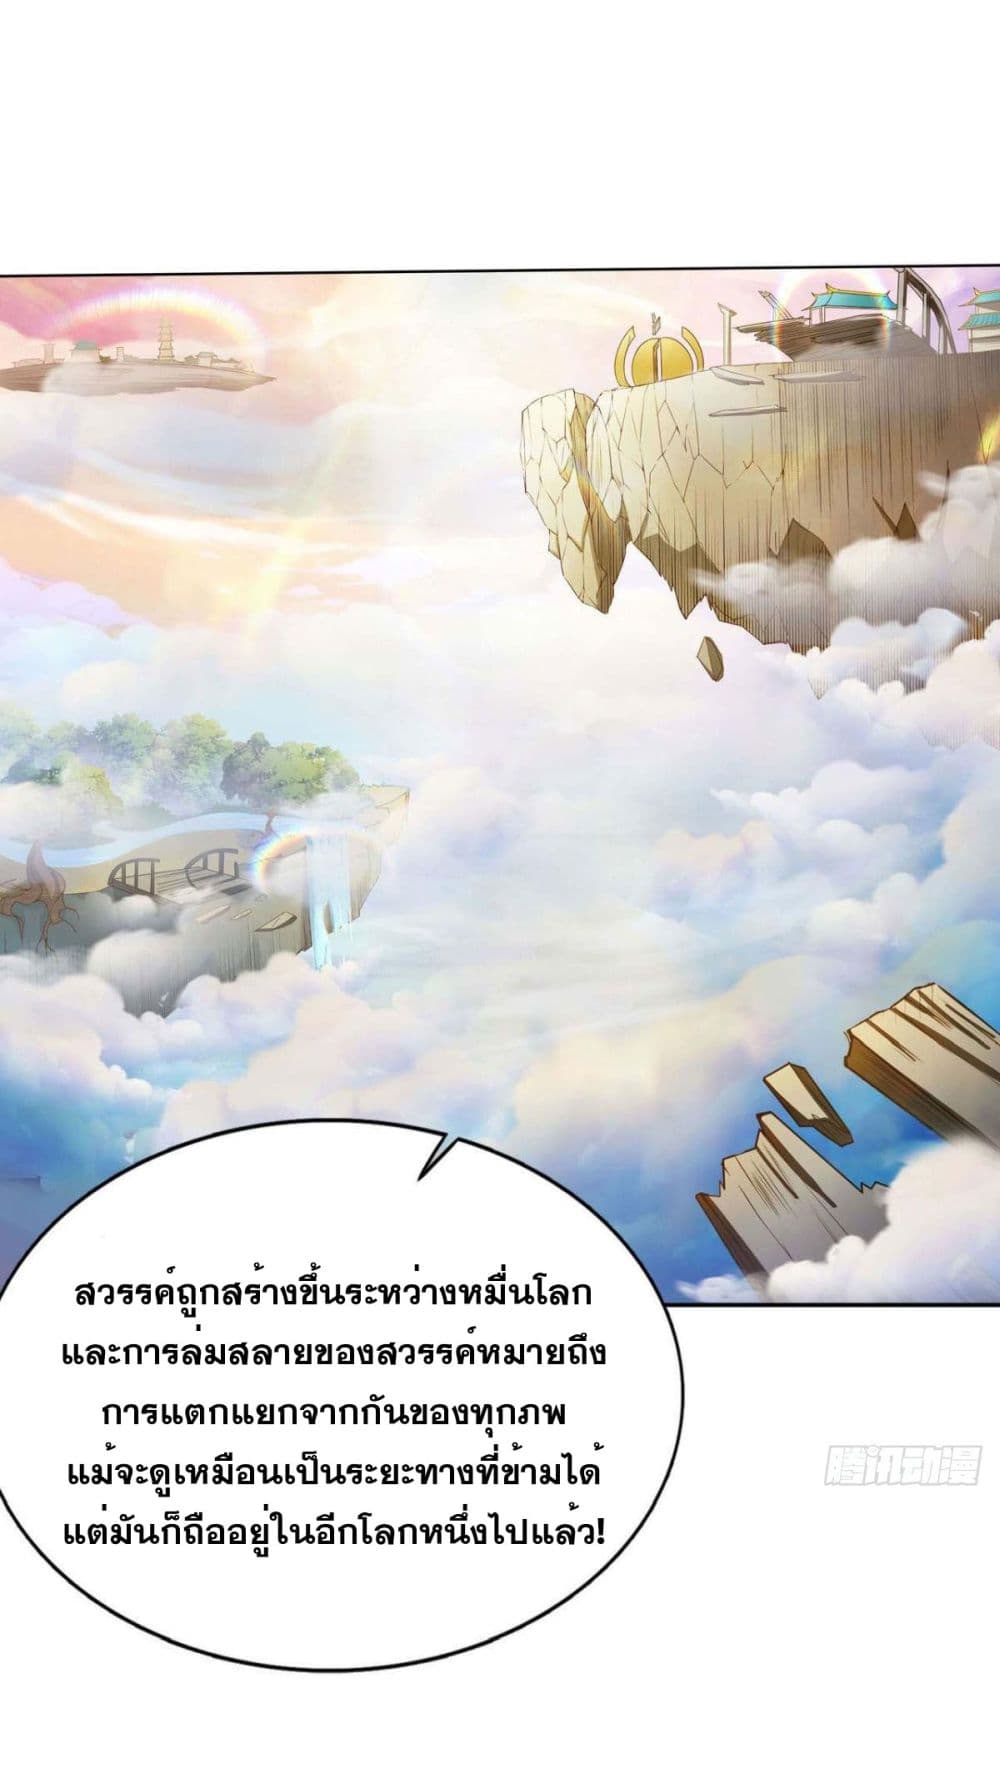 Solve the Crisis of Heaven 2-2